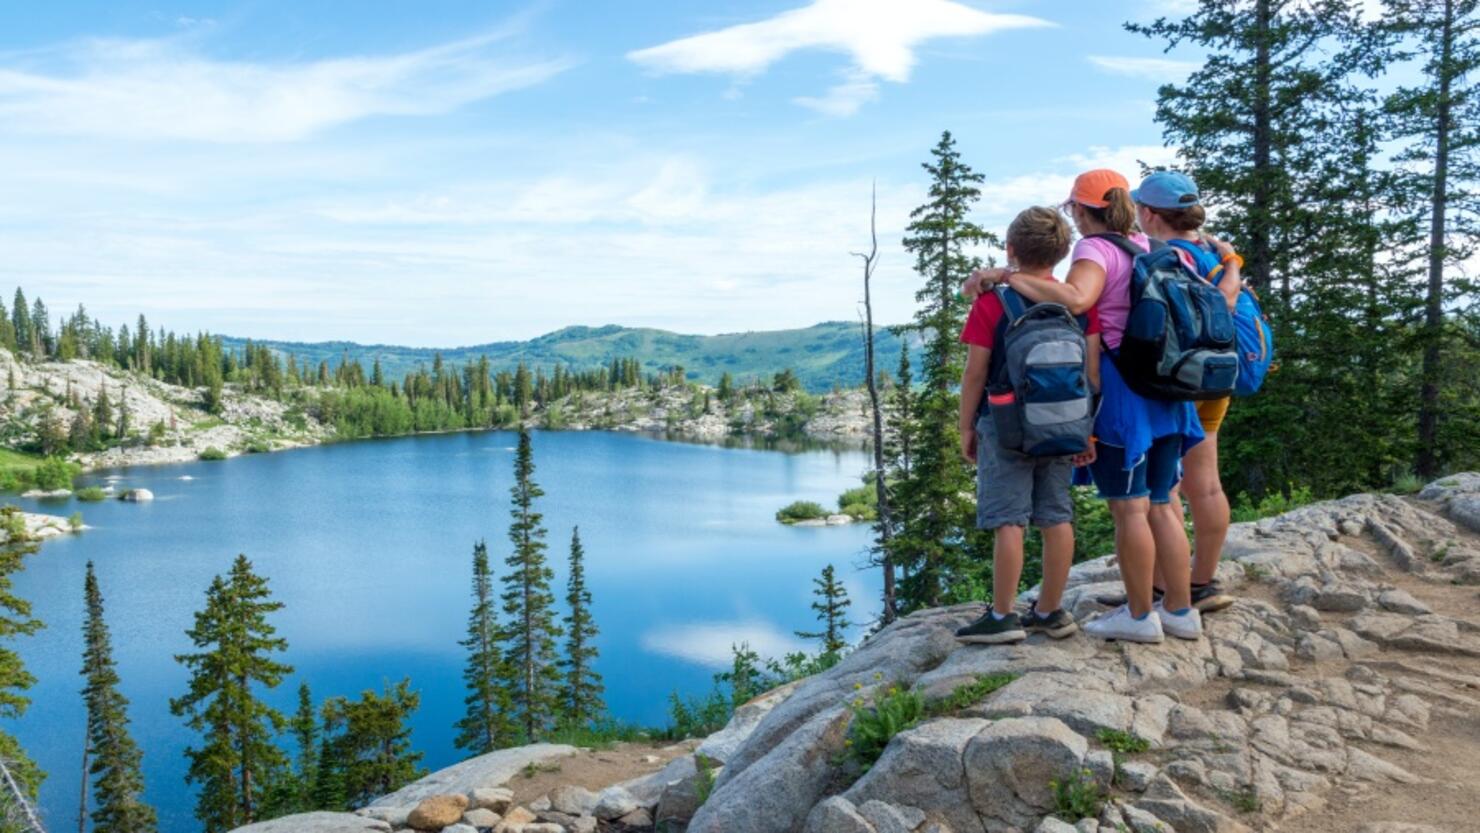 Family Admiring a Panoramic Scene Above a Mountain Lake - Lake Mary in the Wasatch Mountains of Utah